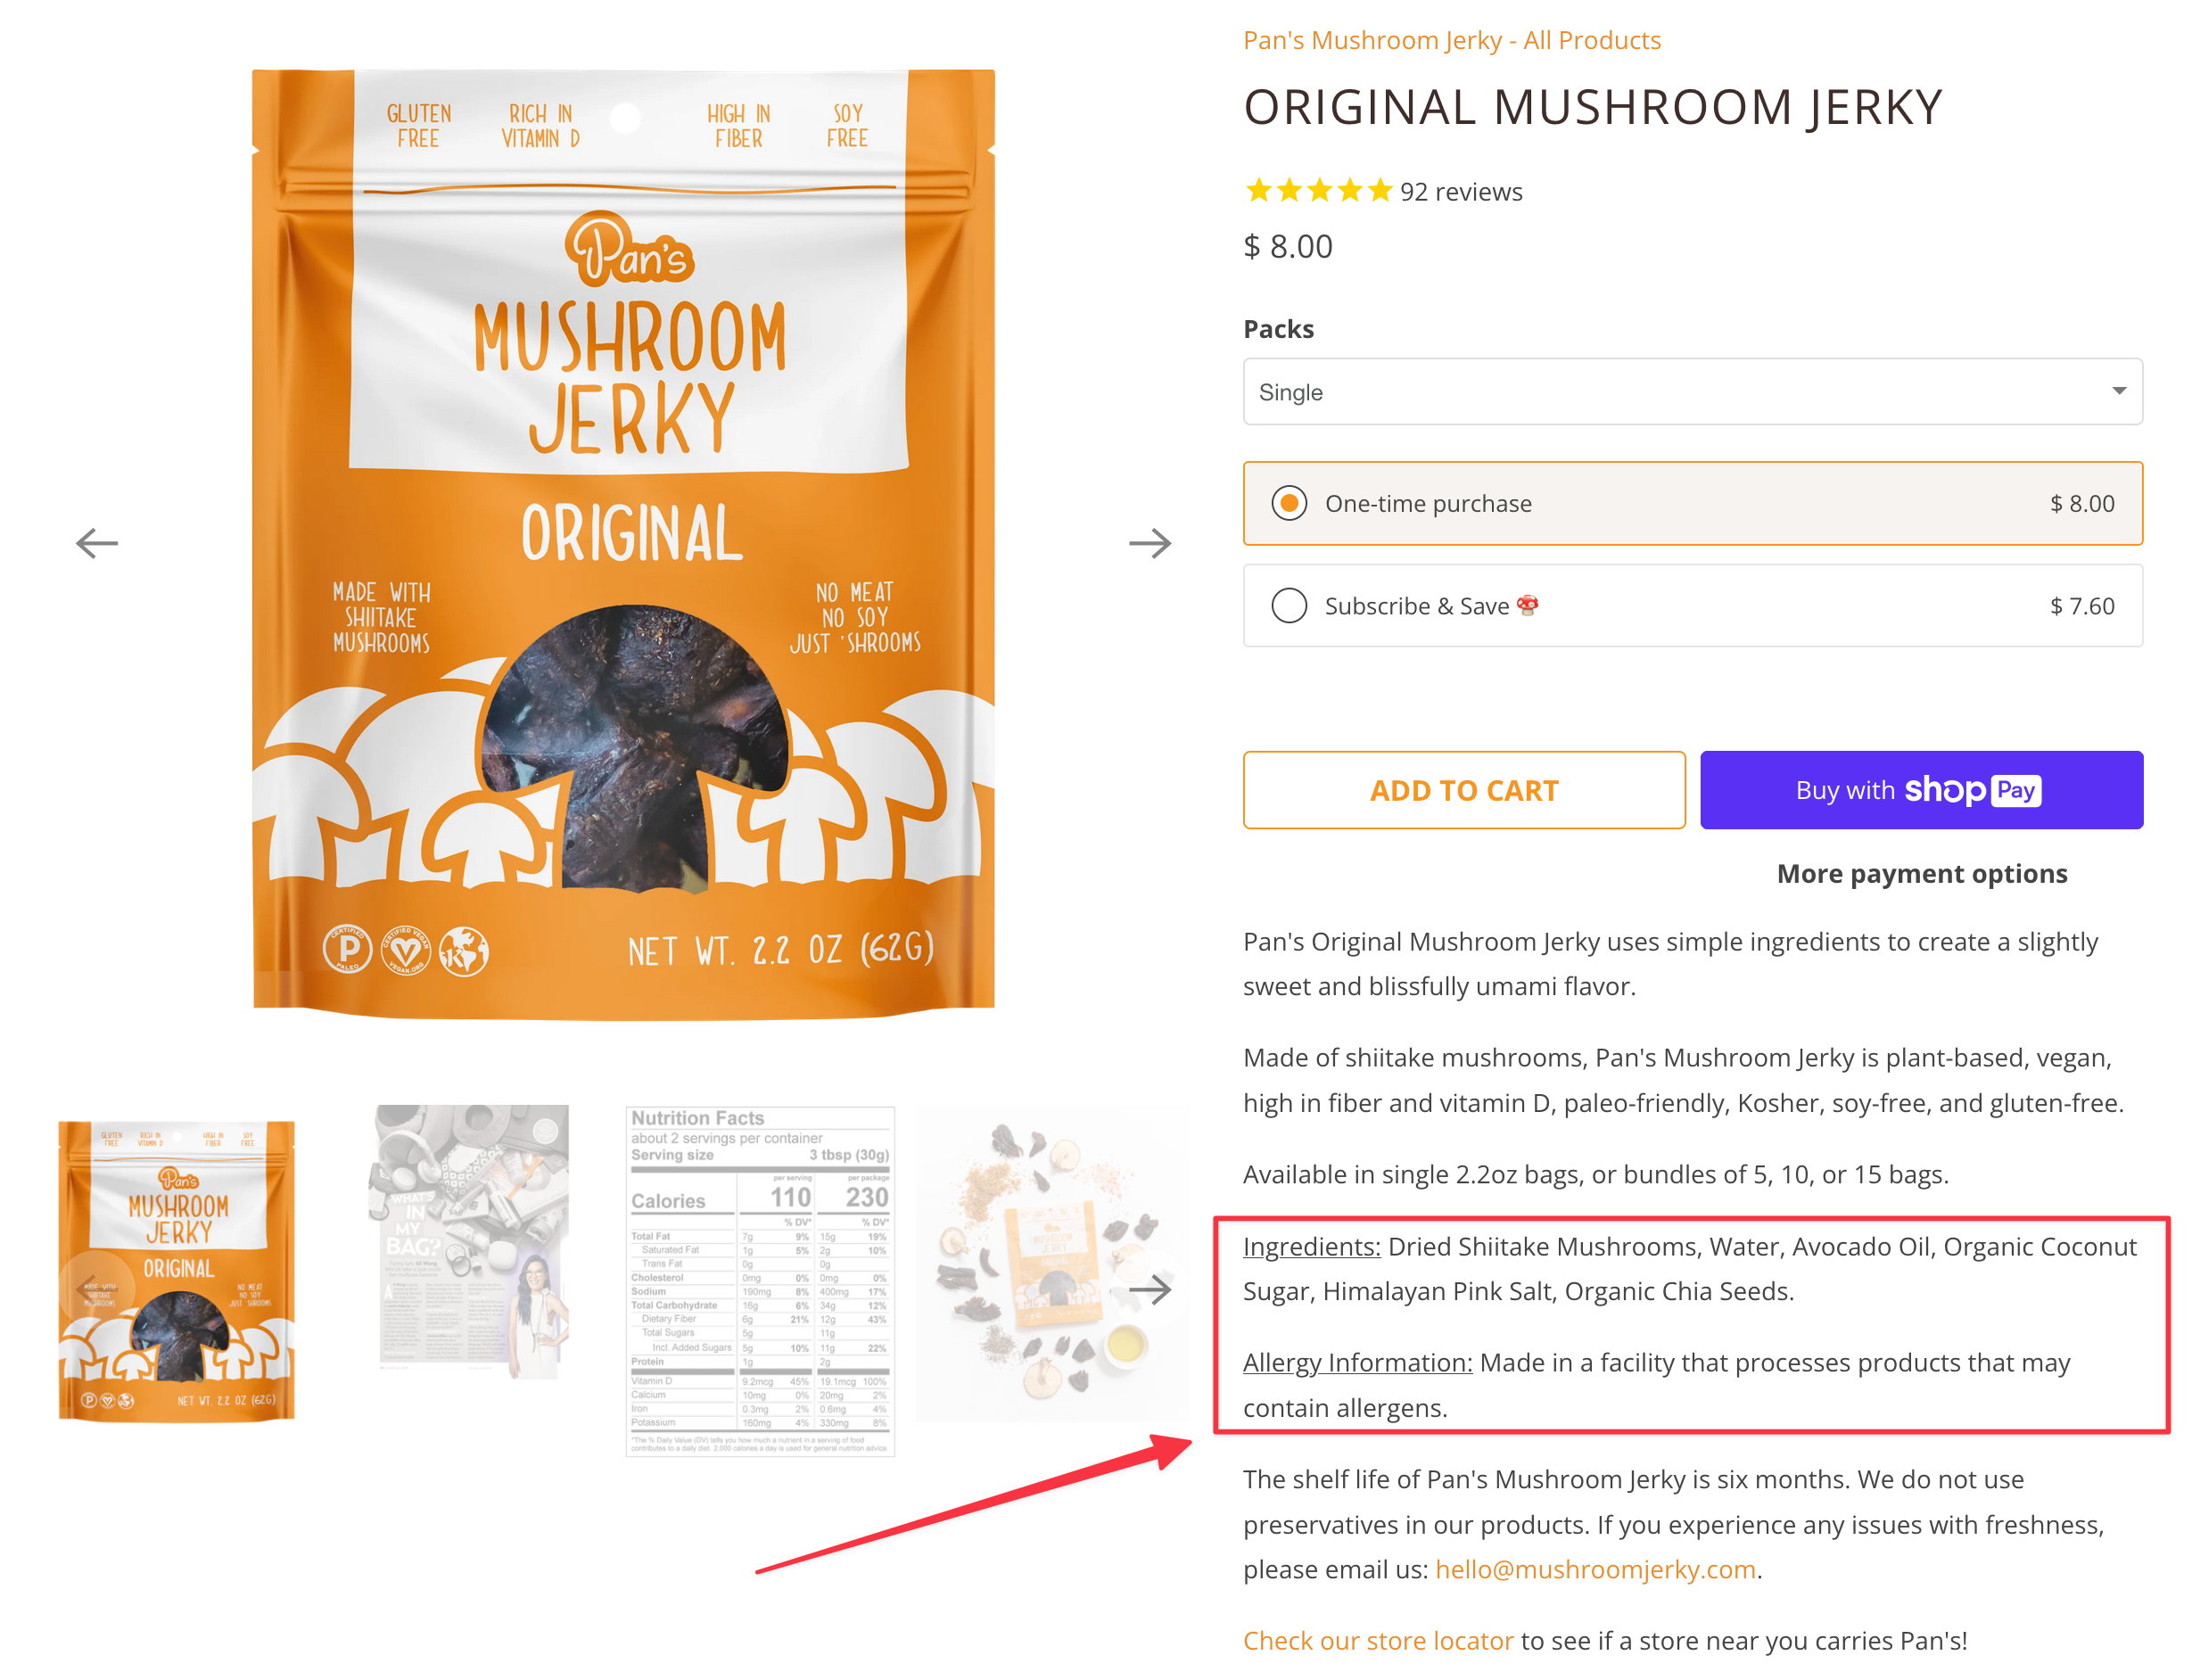 Pan's Mushrooms highlights ingredients and allergen information in their product description.